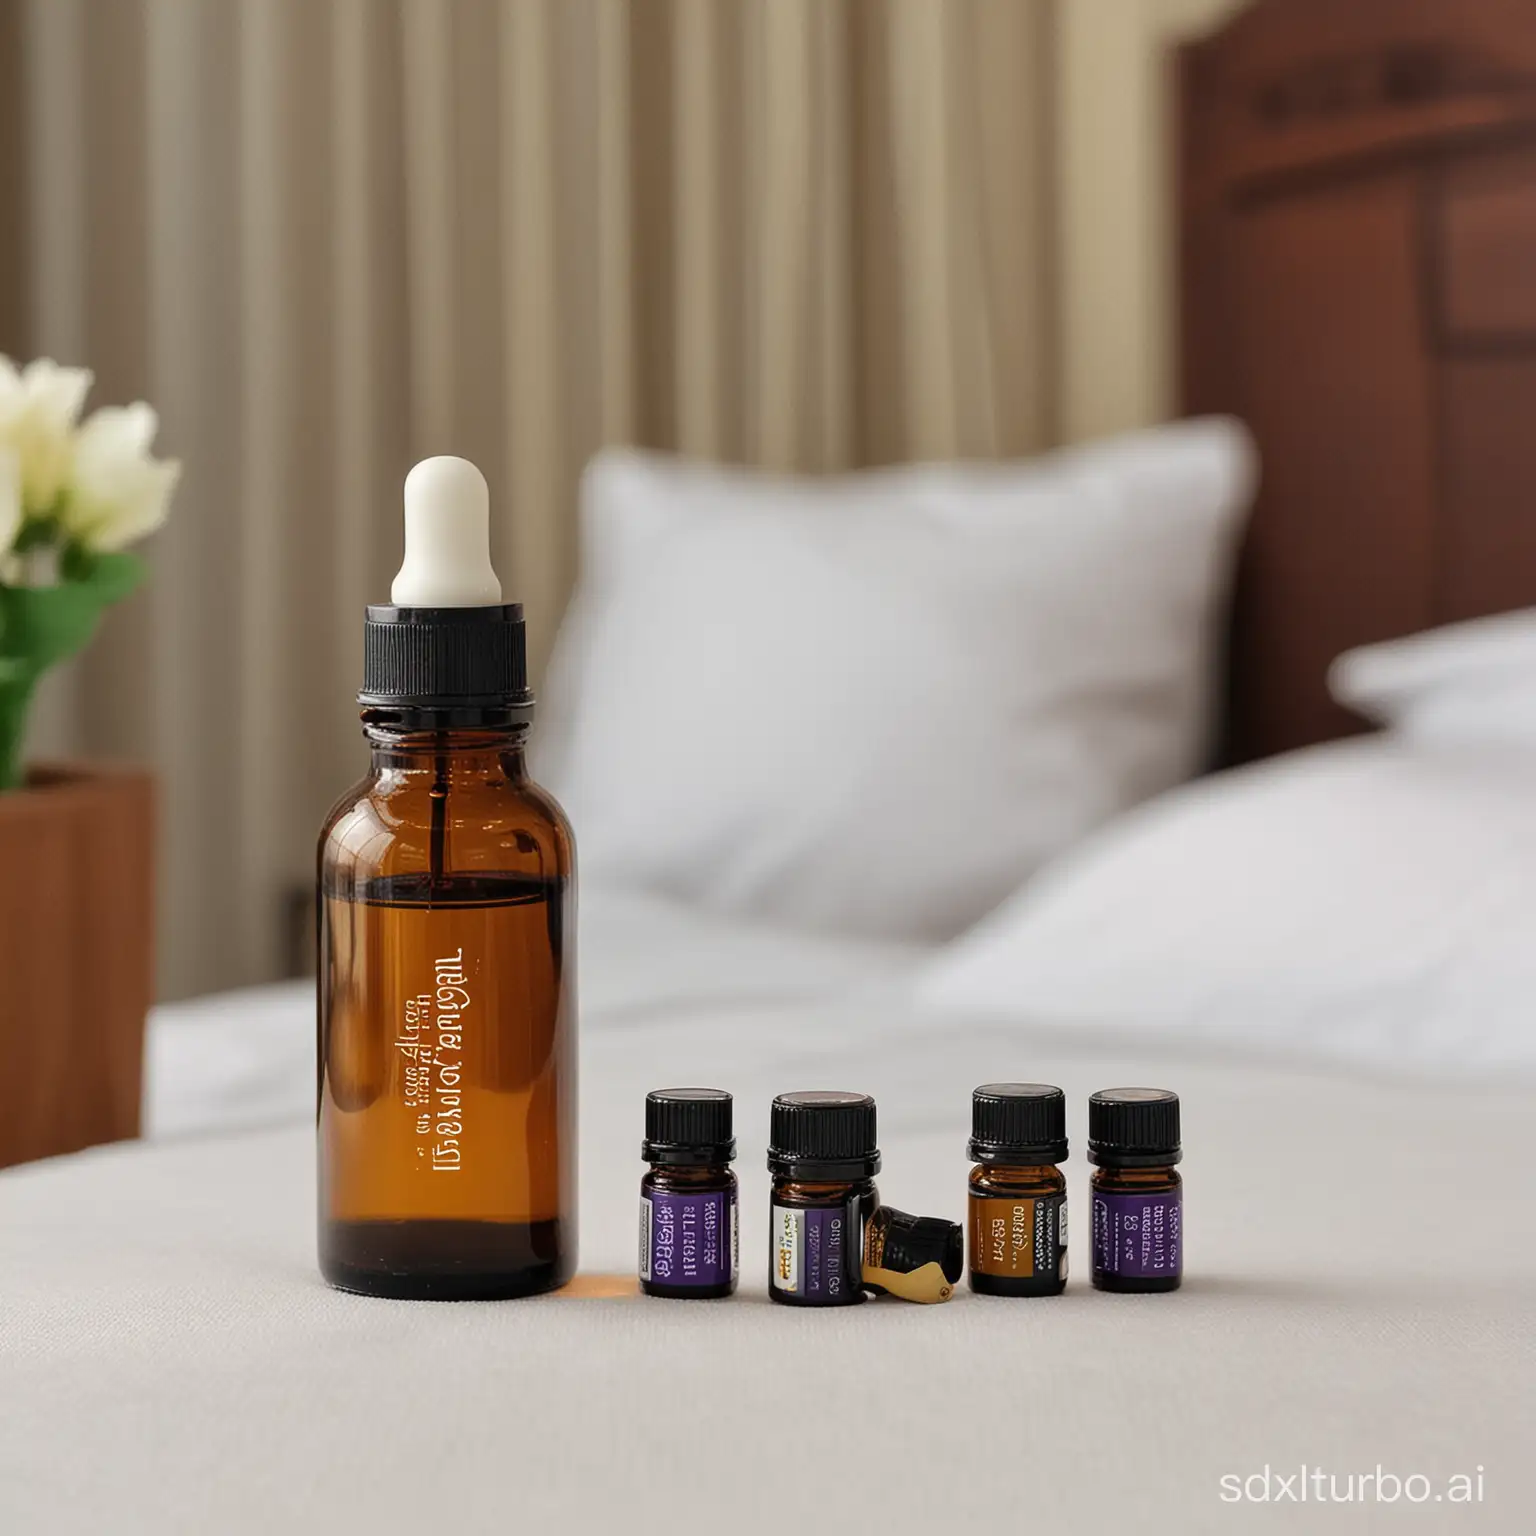 A bottle of essential oil in the hotel